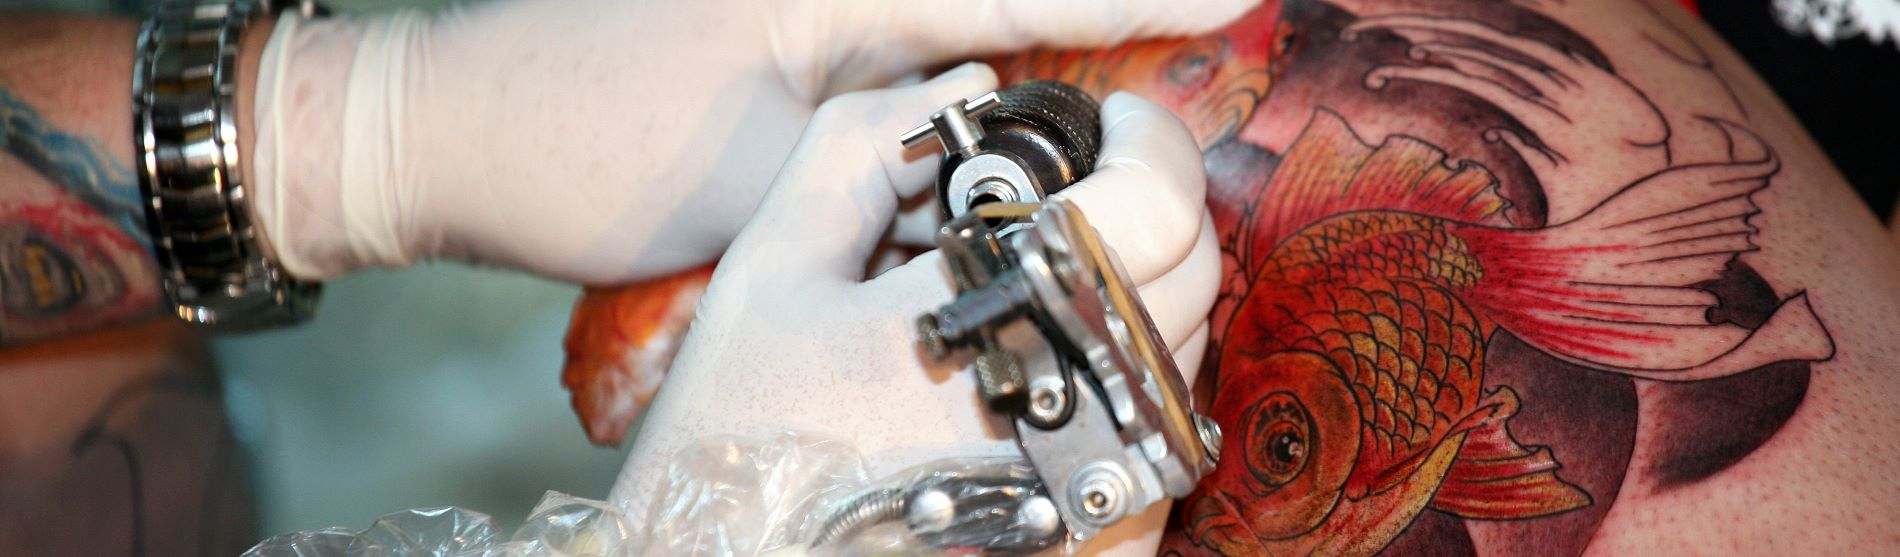 How Do Tattoos Age and How To Prevent It? | Ink Nurse